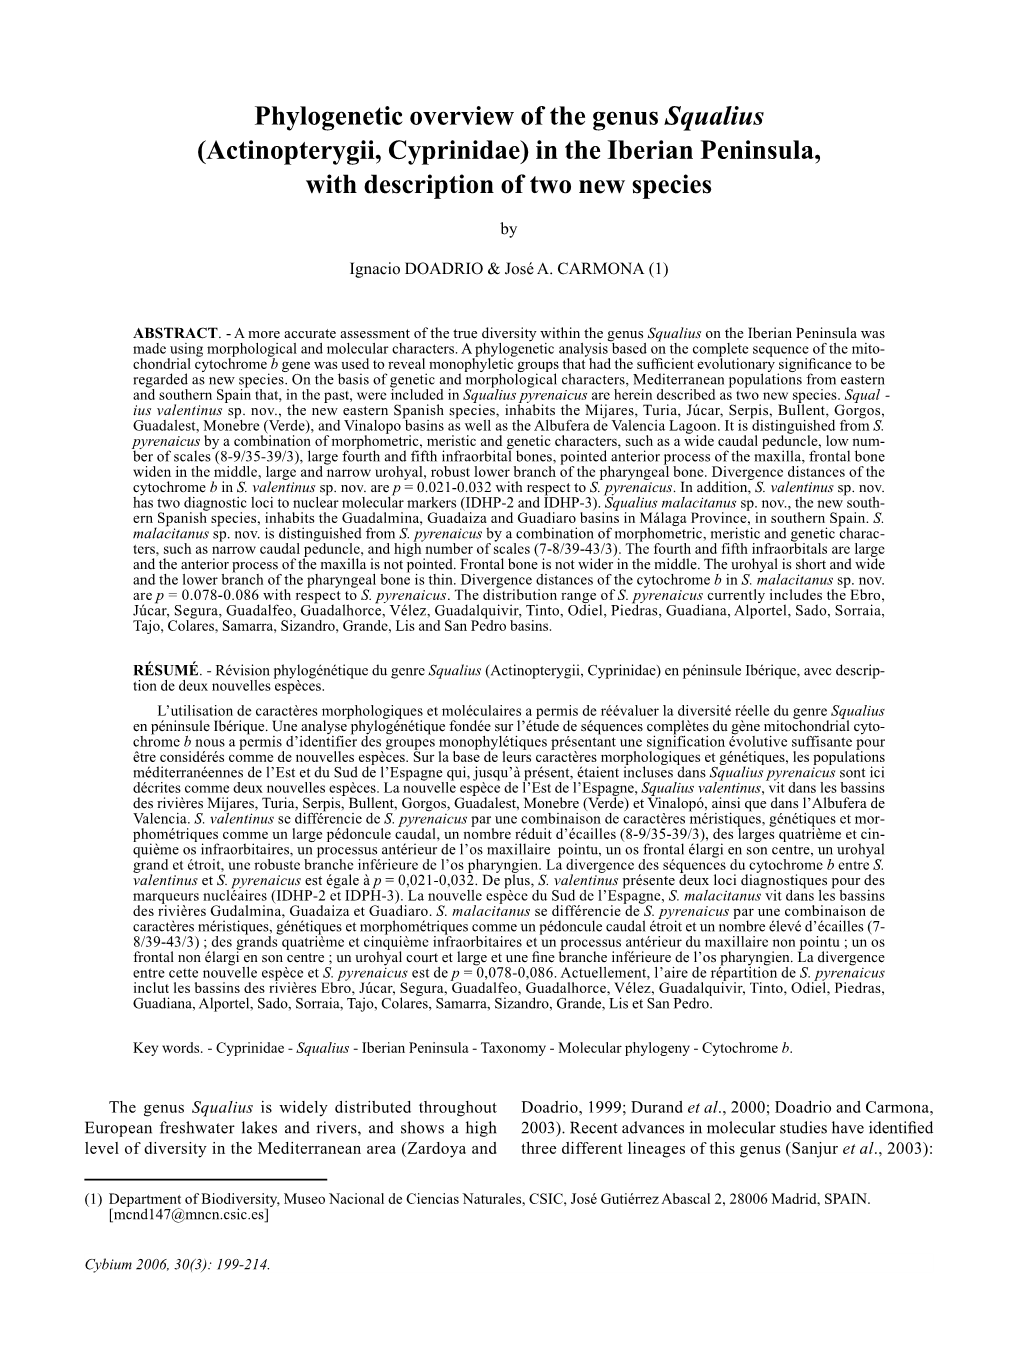 Phylogenetic Overview of the Genus Squalius (Actinopterygii, Cyprinidae) in the Iberian Peninsula, with Description of Two New Species